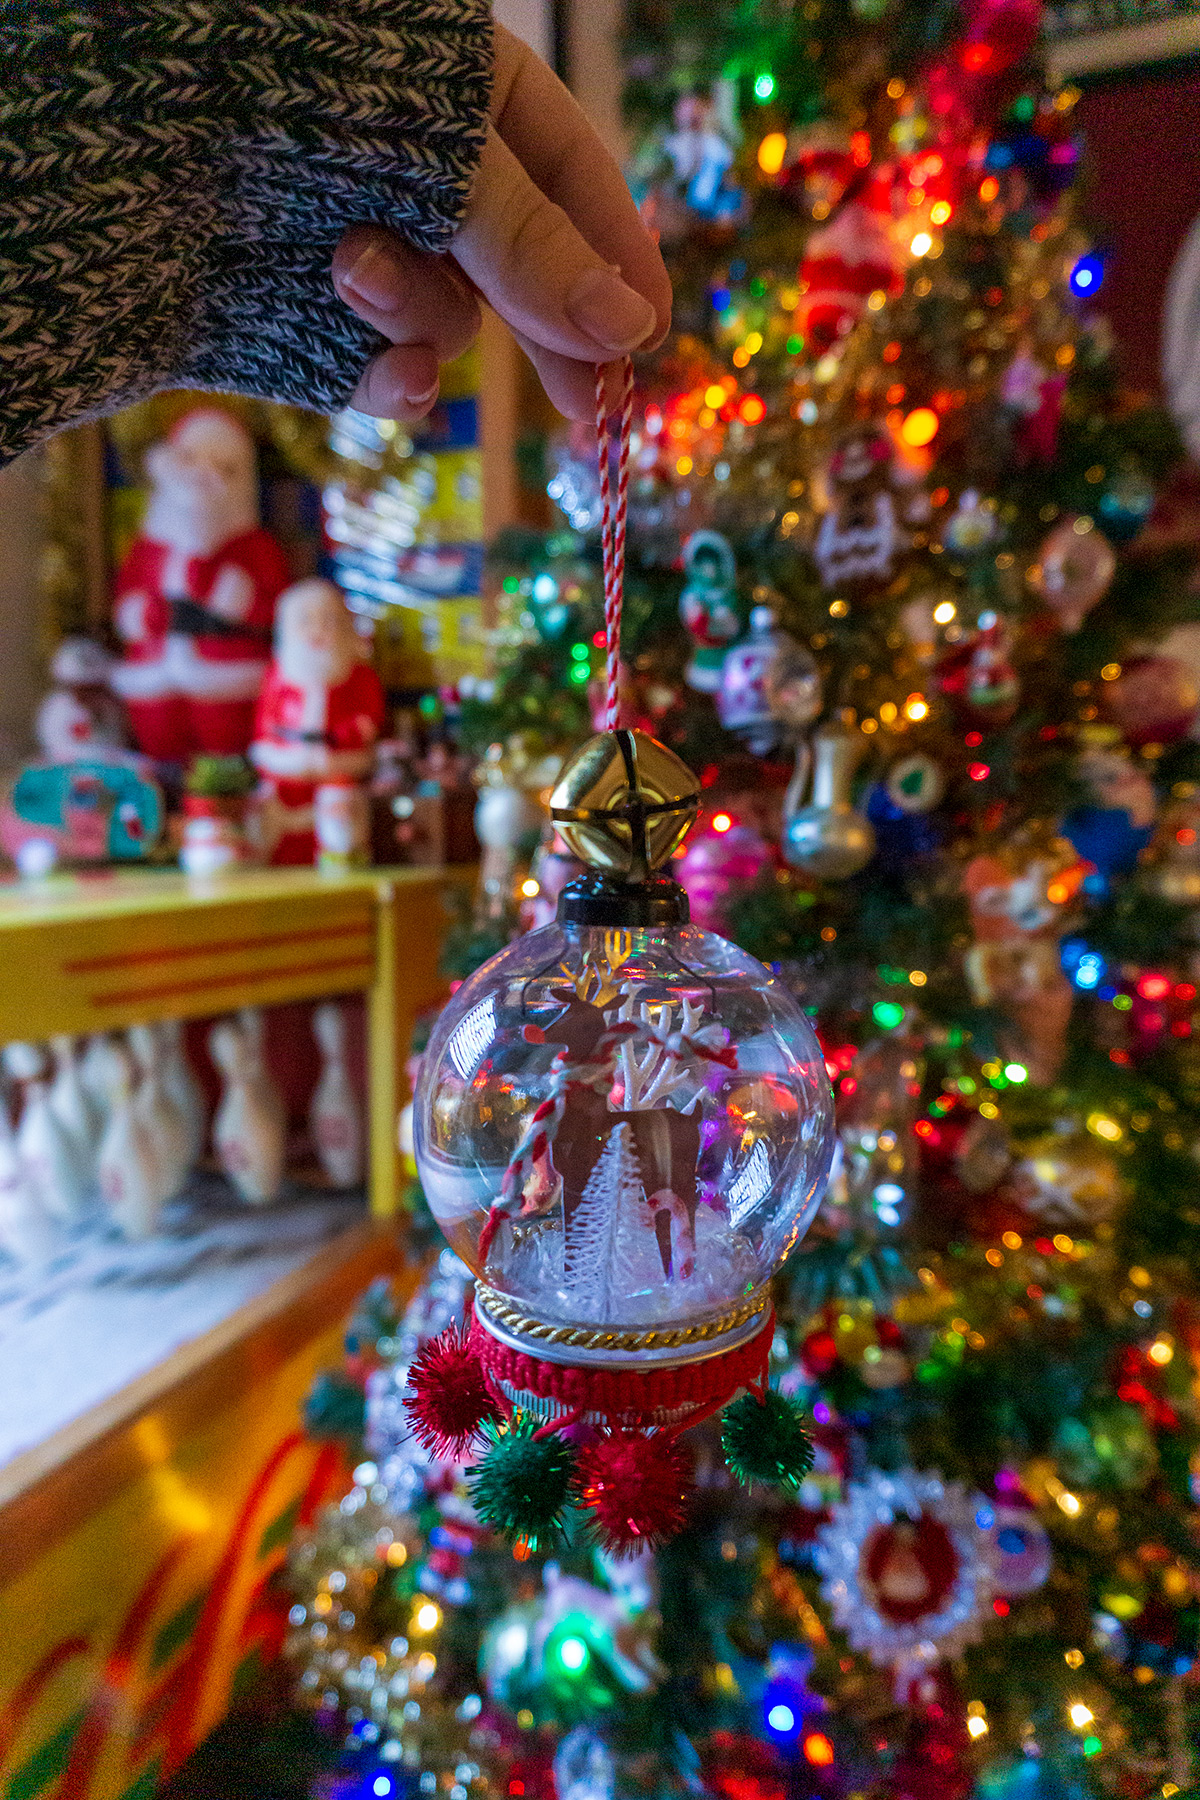 Christmas Crafting: Easy DIY Snow Globe Ornaments from Cupcake Toppers